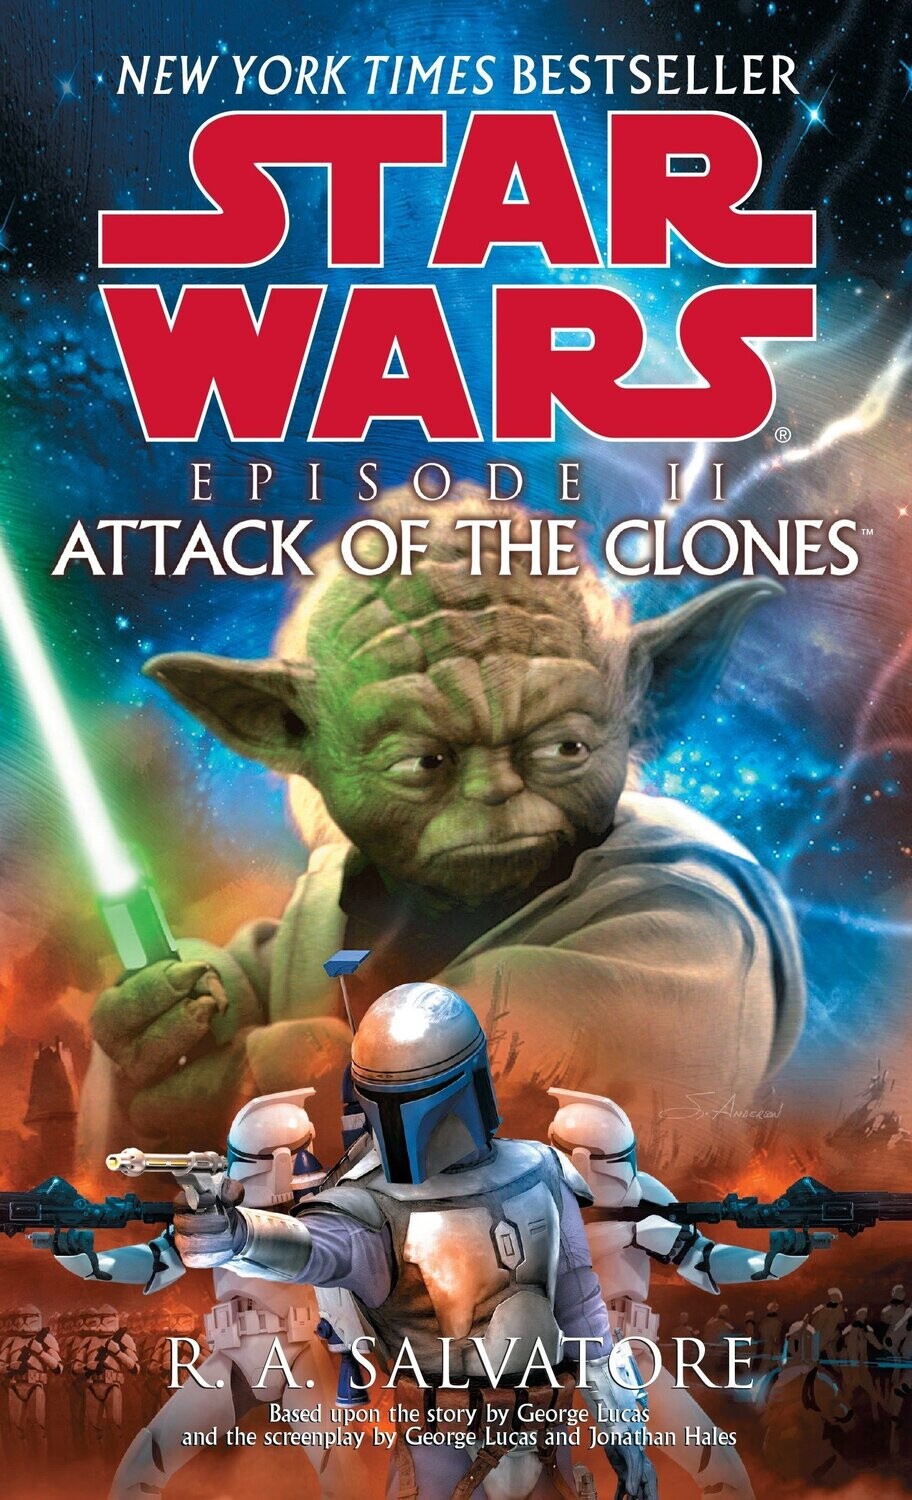 Star Wars Ep. II: Attack of the Clones